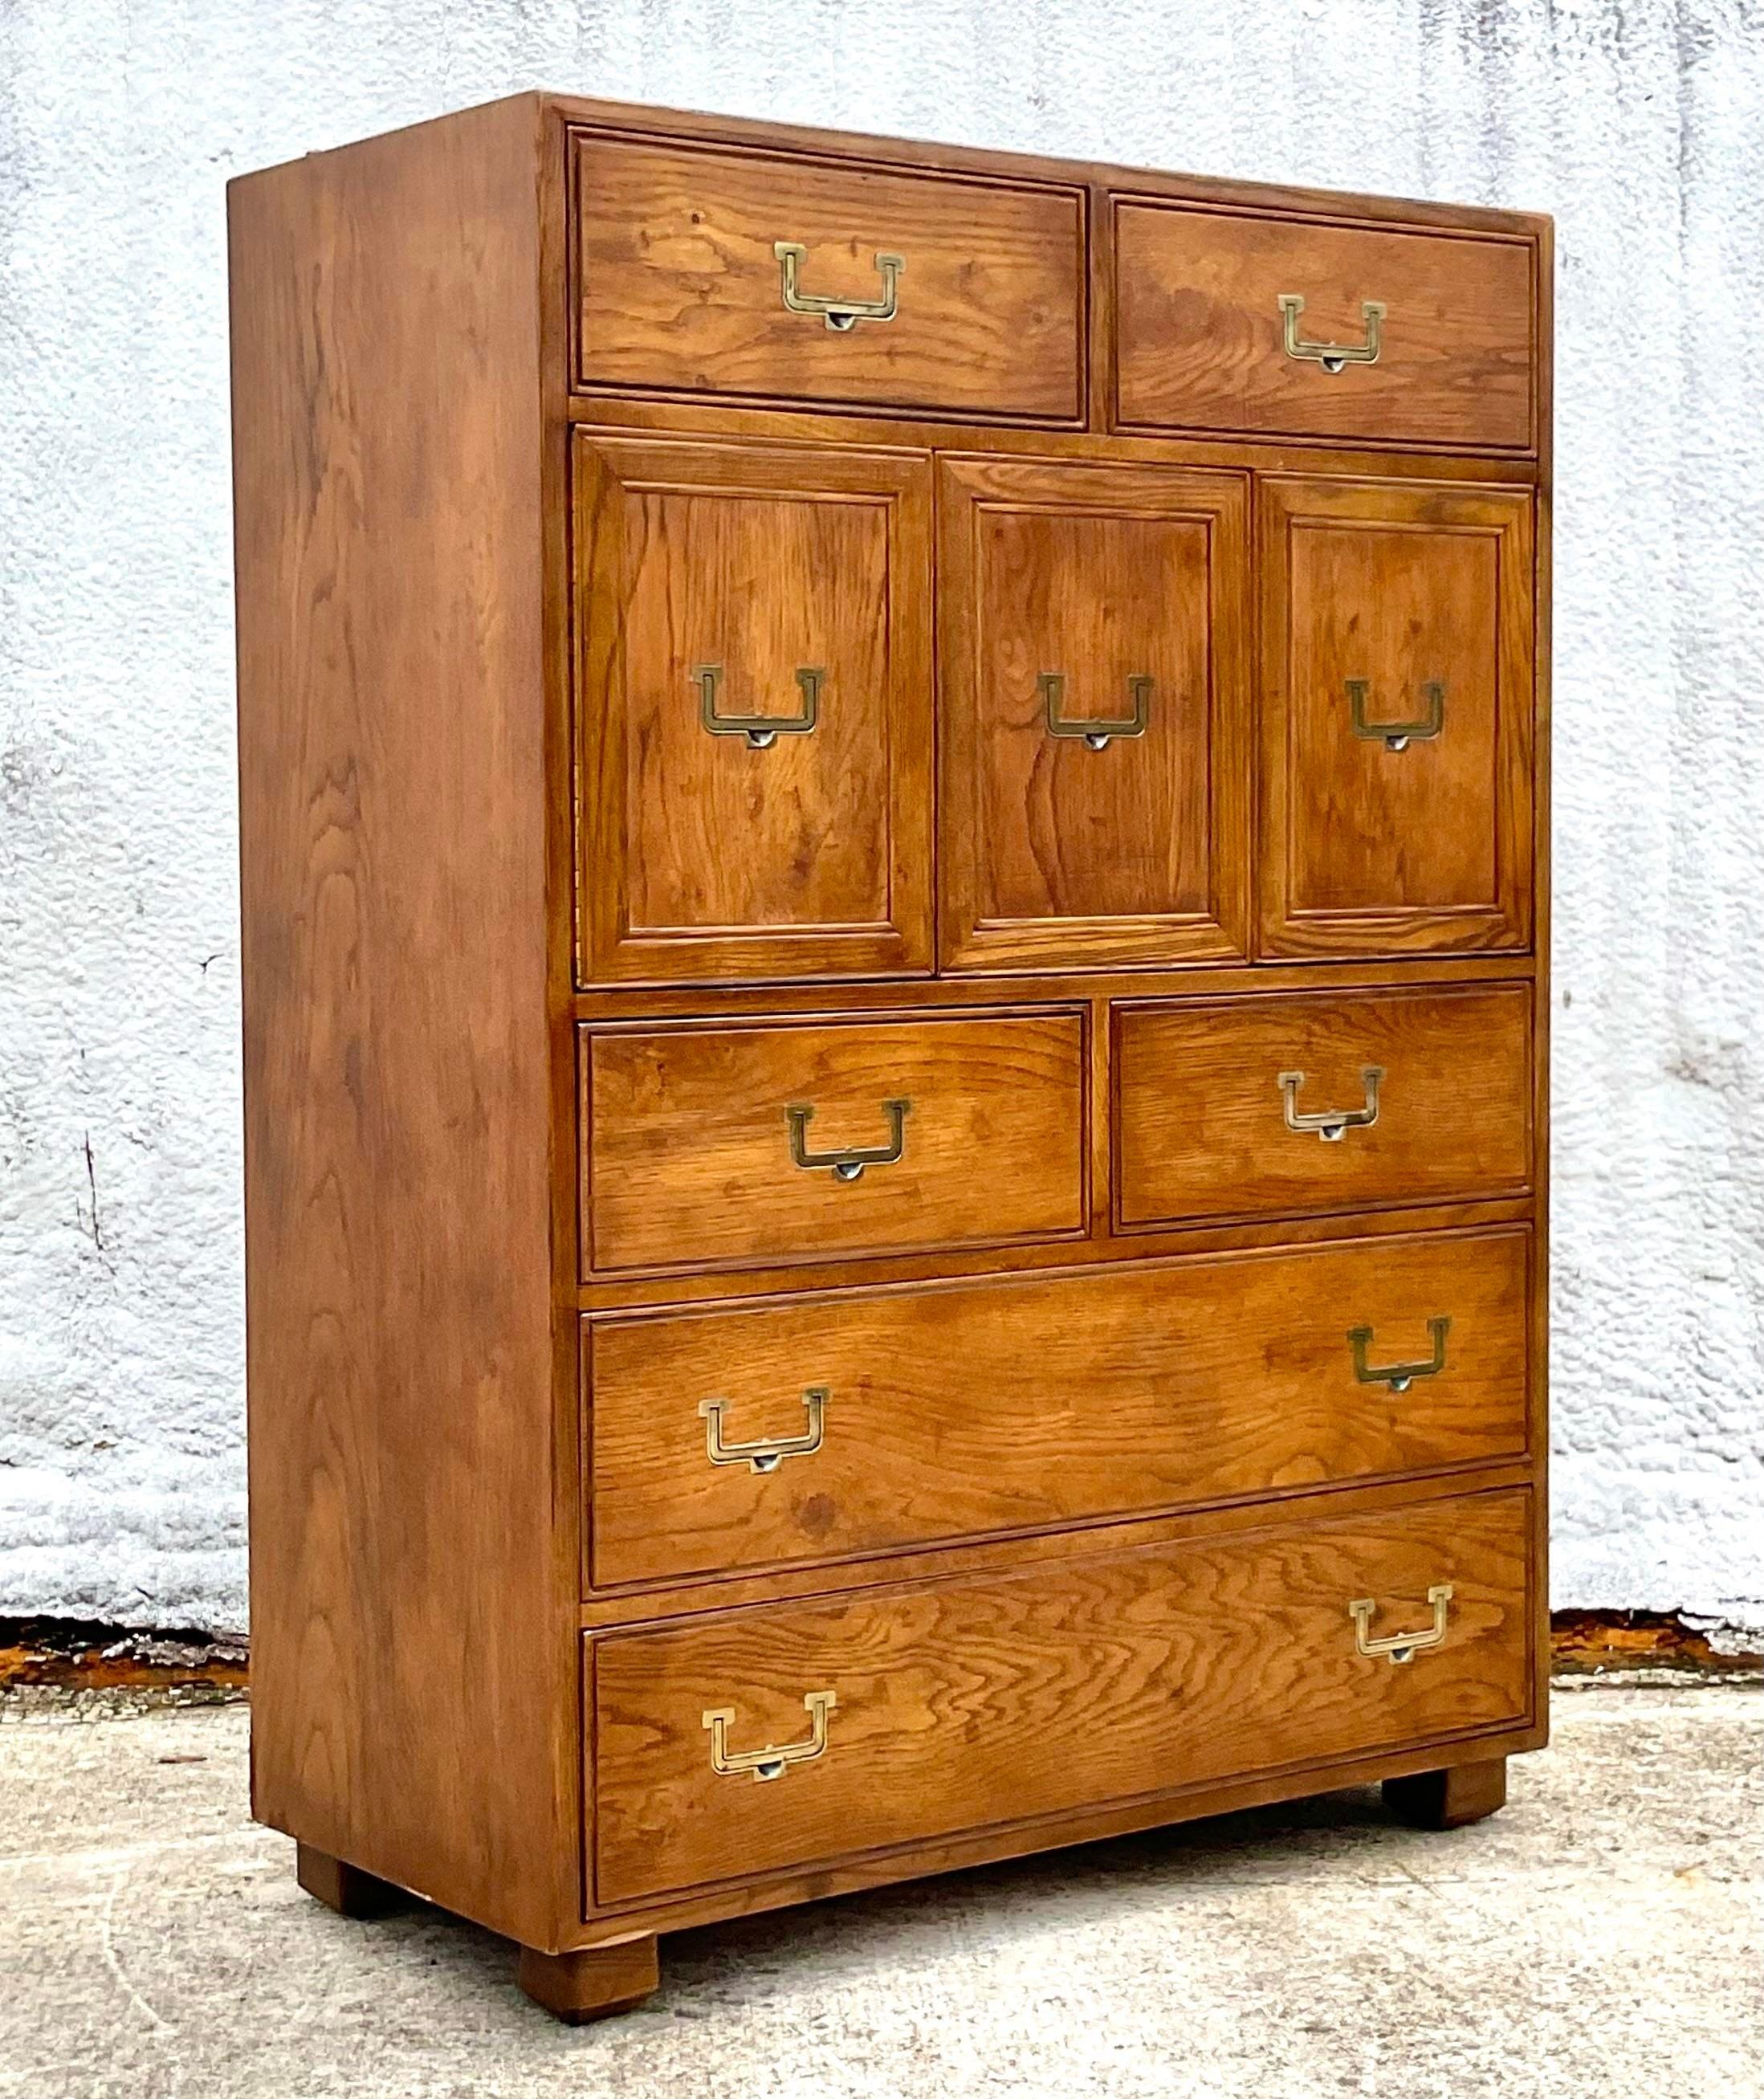 Gorgeous vintage Boho Gentleman’s chest of drawers. Made by the iconic Henredon group and part of their Artefacts collection. Acquired by a Palm Beach estate.